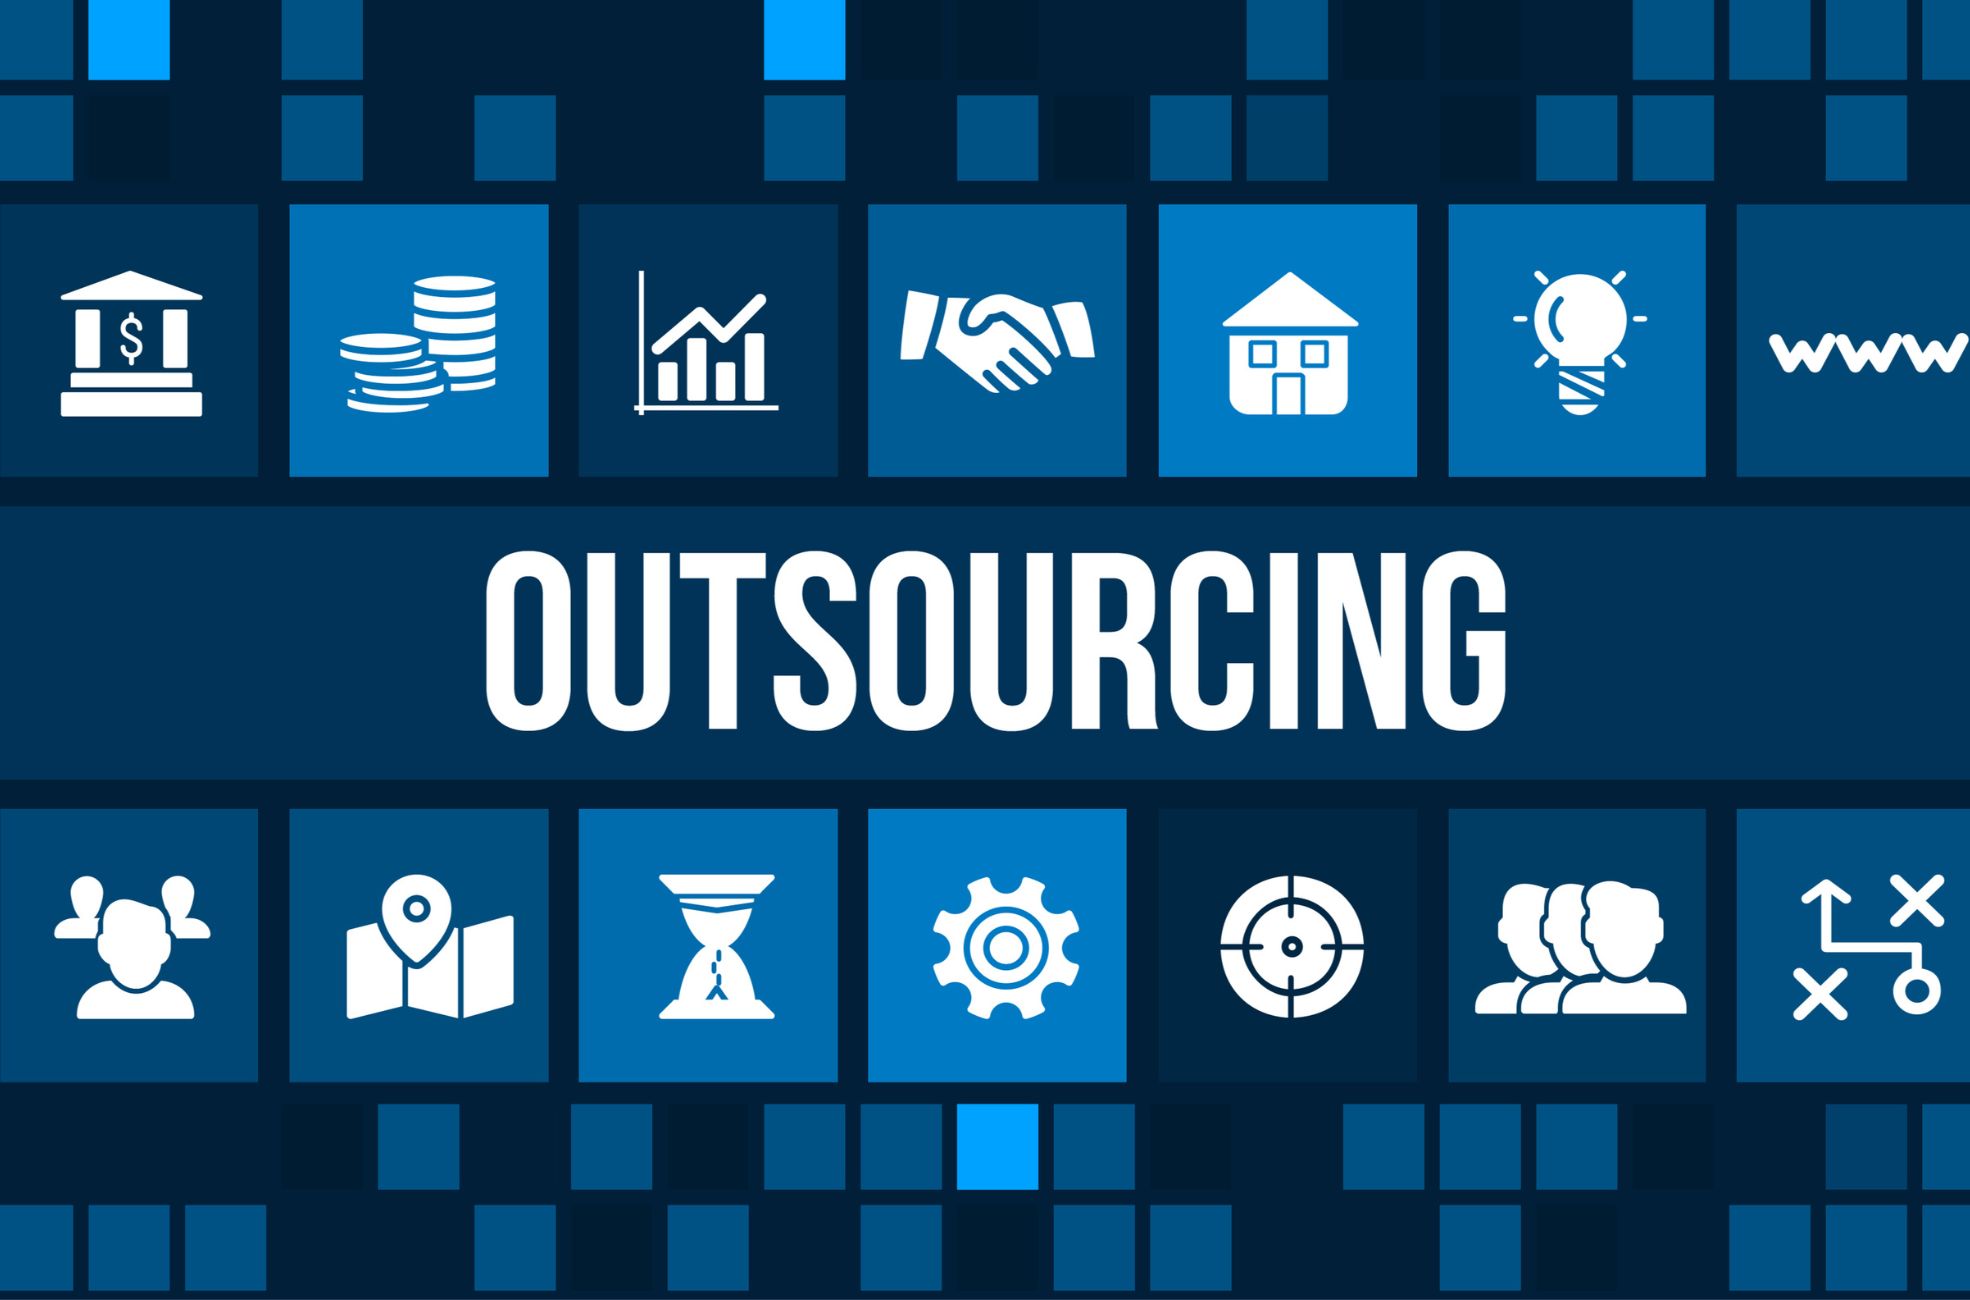 "Outsourcing" Title With Diagram Artwork